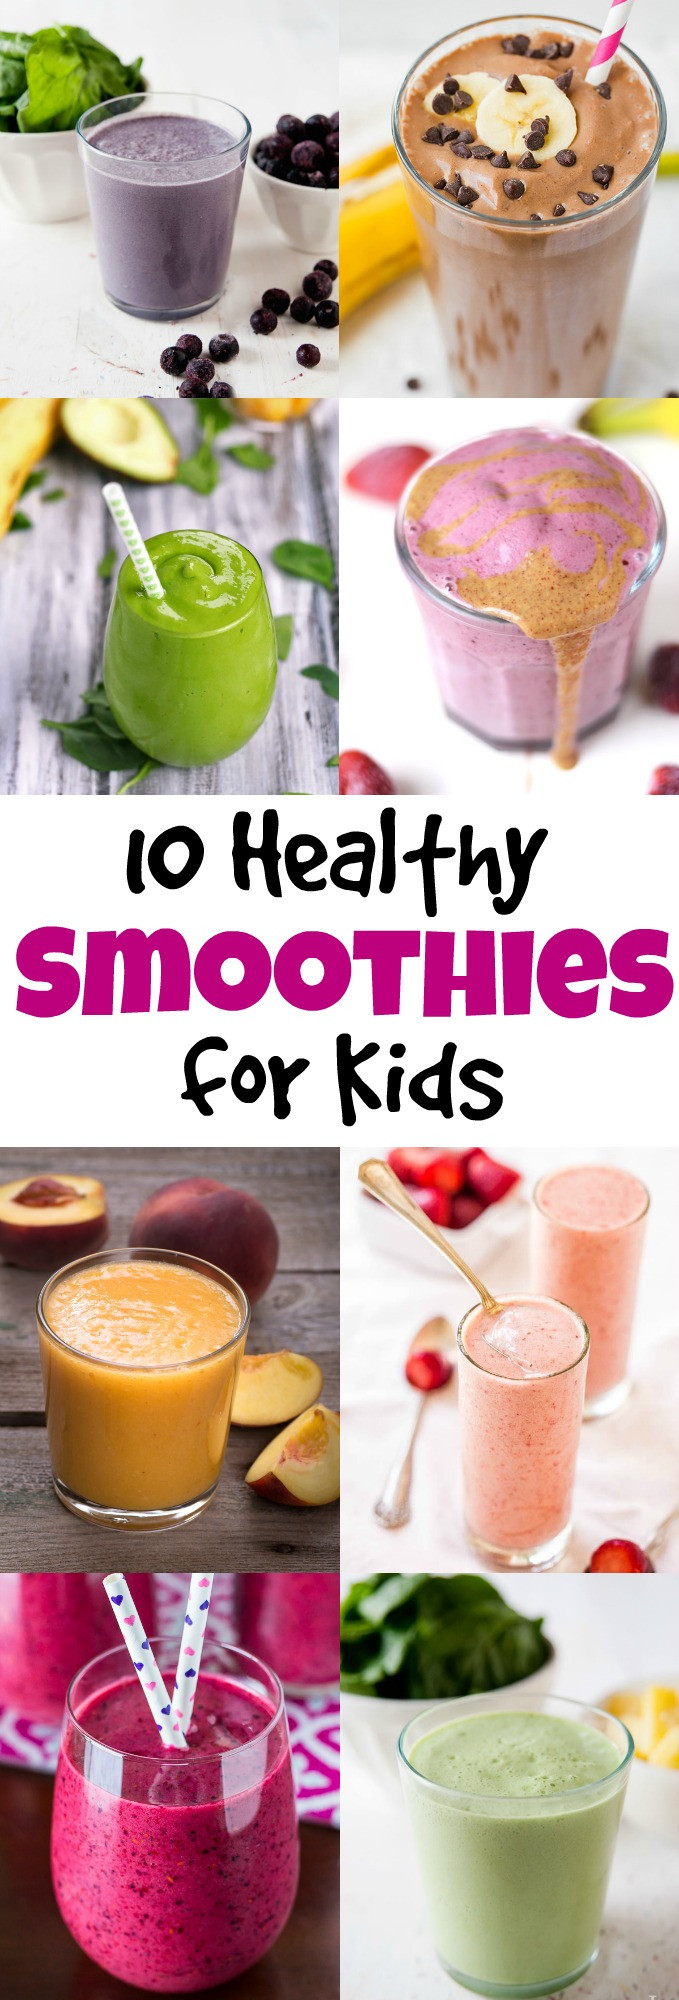 Healthy Smoothies For Kids With Veggies
 10 Healthy Smoothies for Kids MOMables Good Food